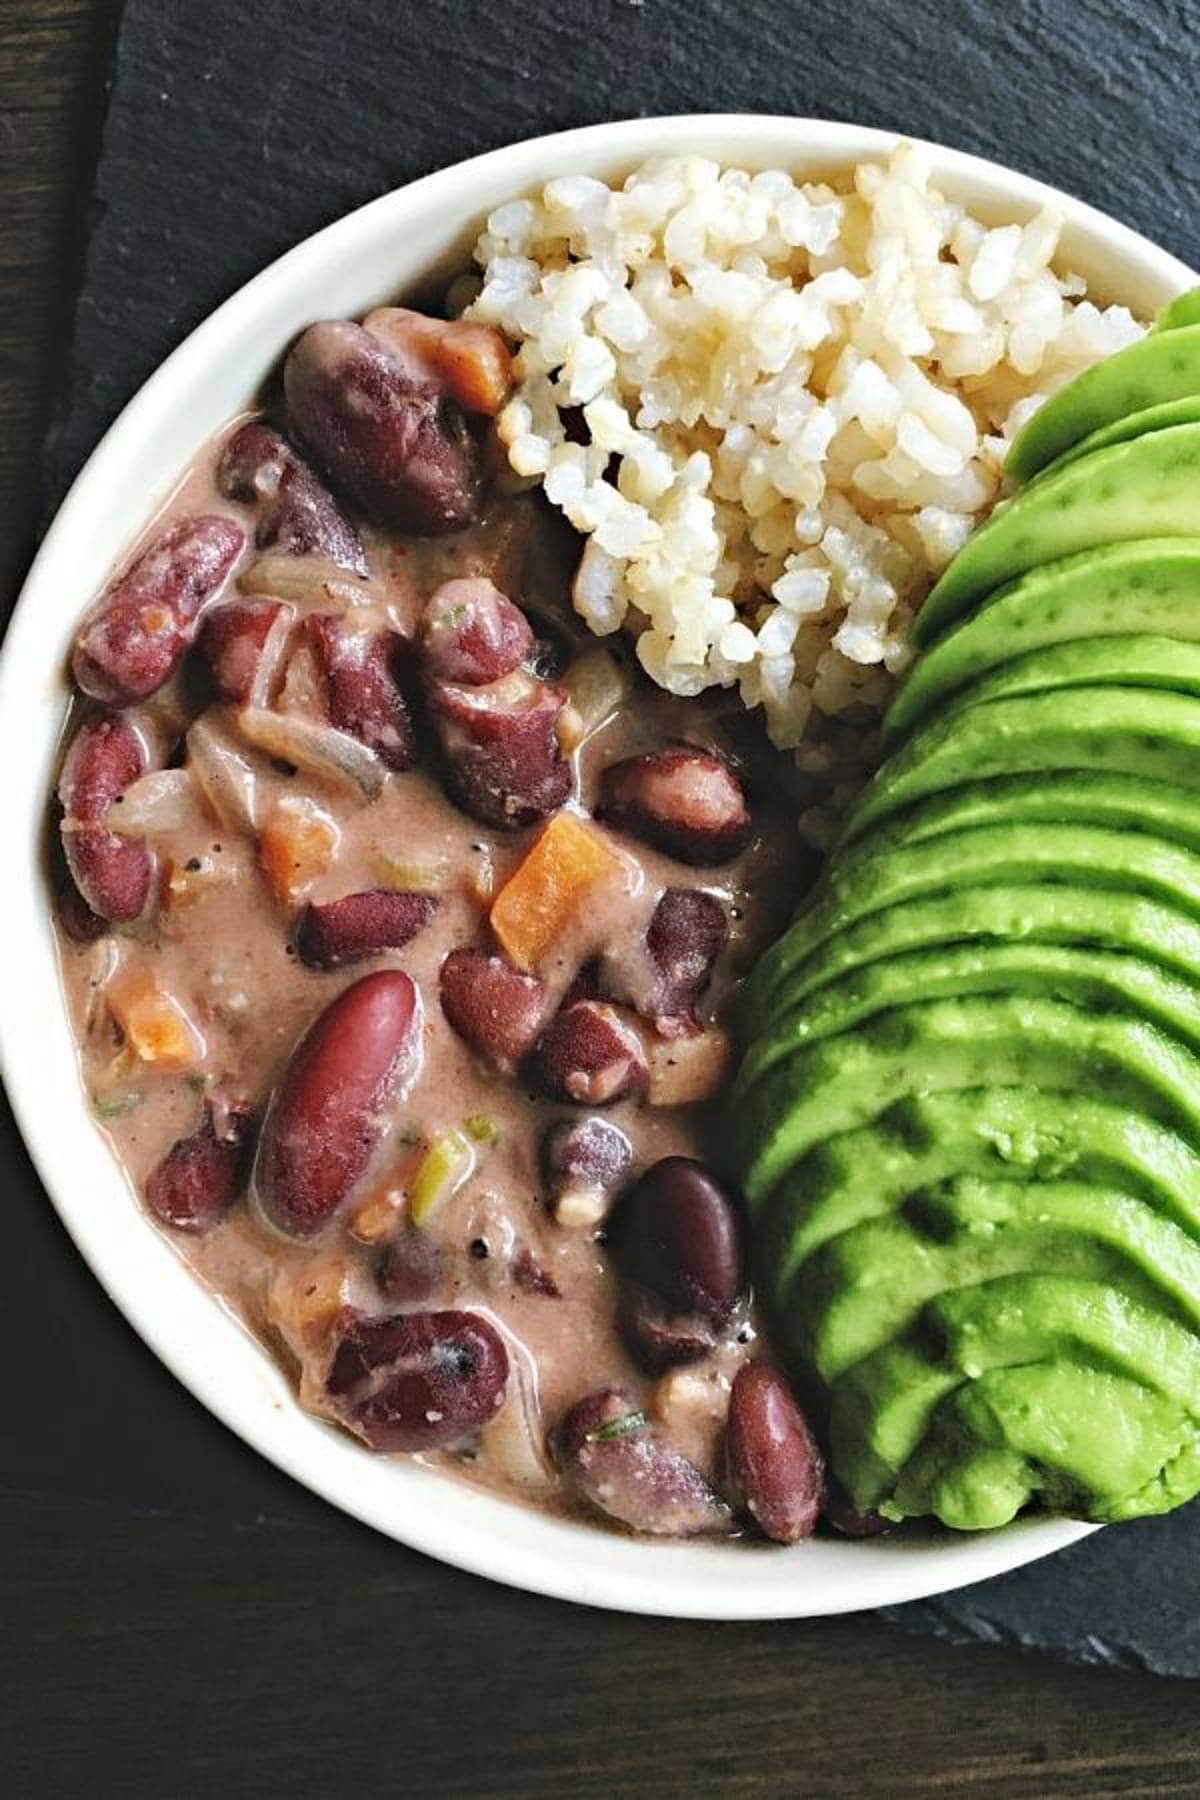 Vegan jamaican red bean stew with avocado and rice in a bowl